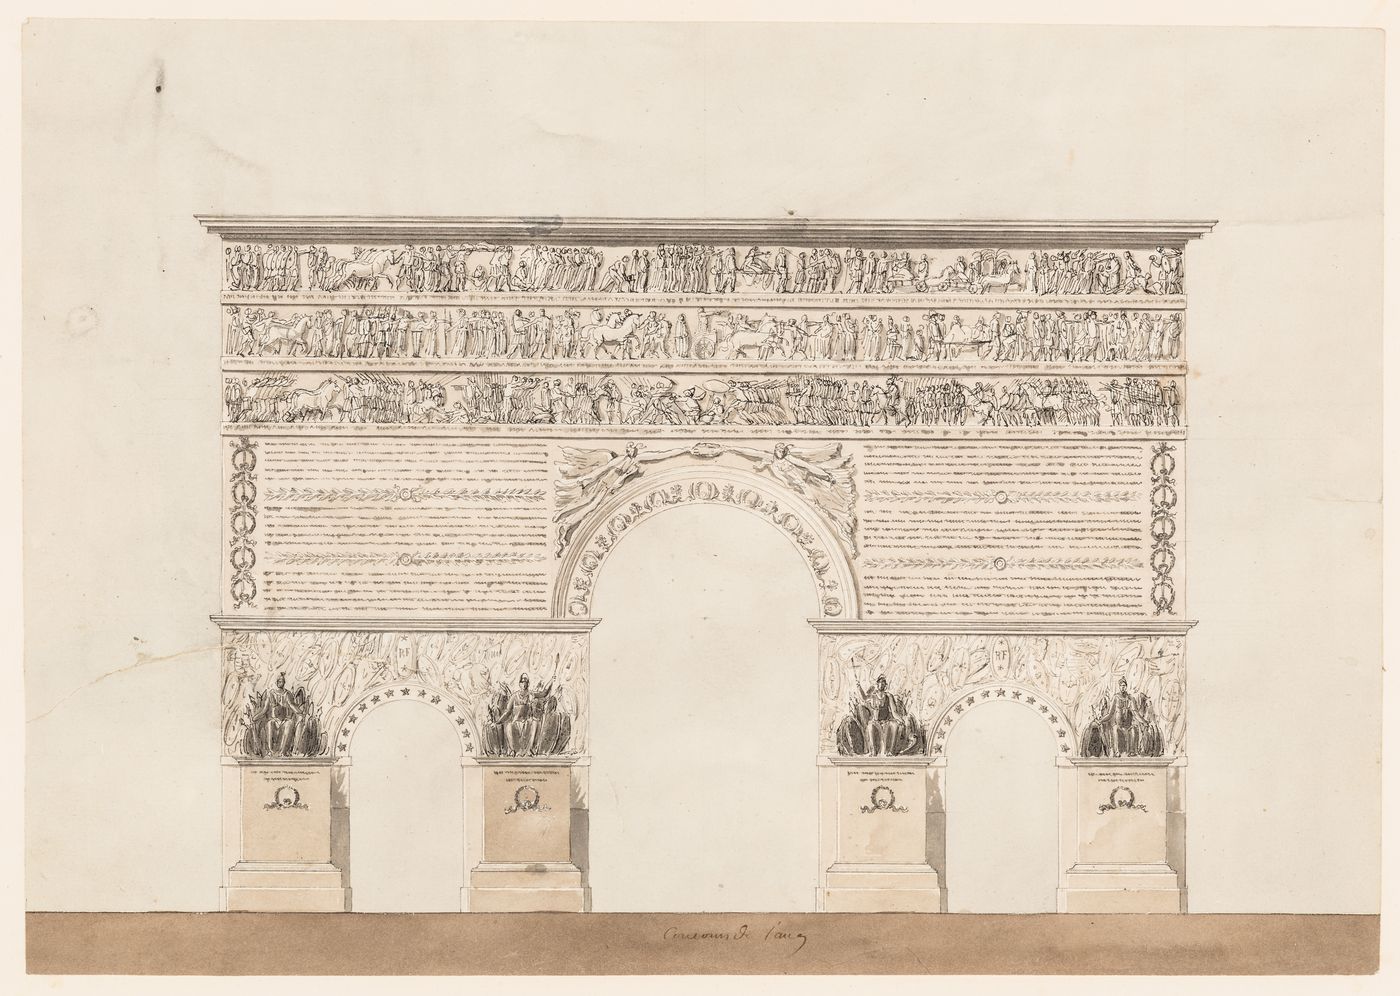 1801 Grand Prix Competition: Plan for a forum or public square dedicated to peace; verso: 1801 Grand Prix Competition: Elevation for a triumphal arch entrance for a forum or public square dedicated to peace